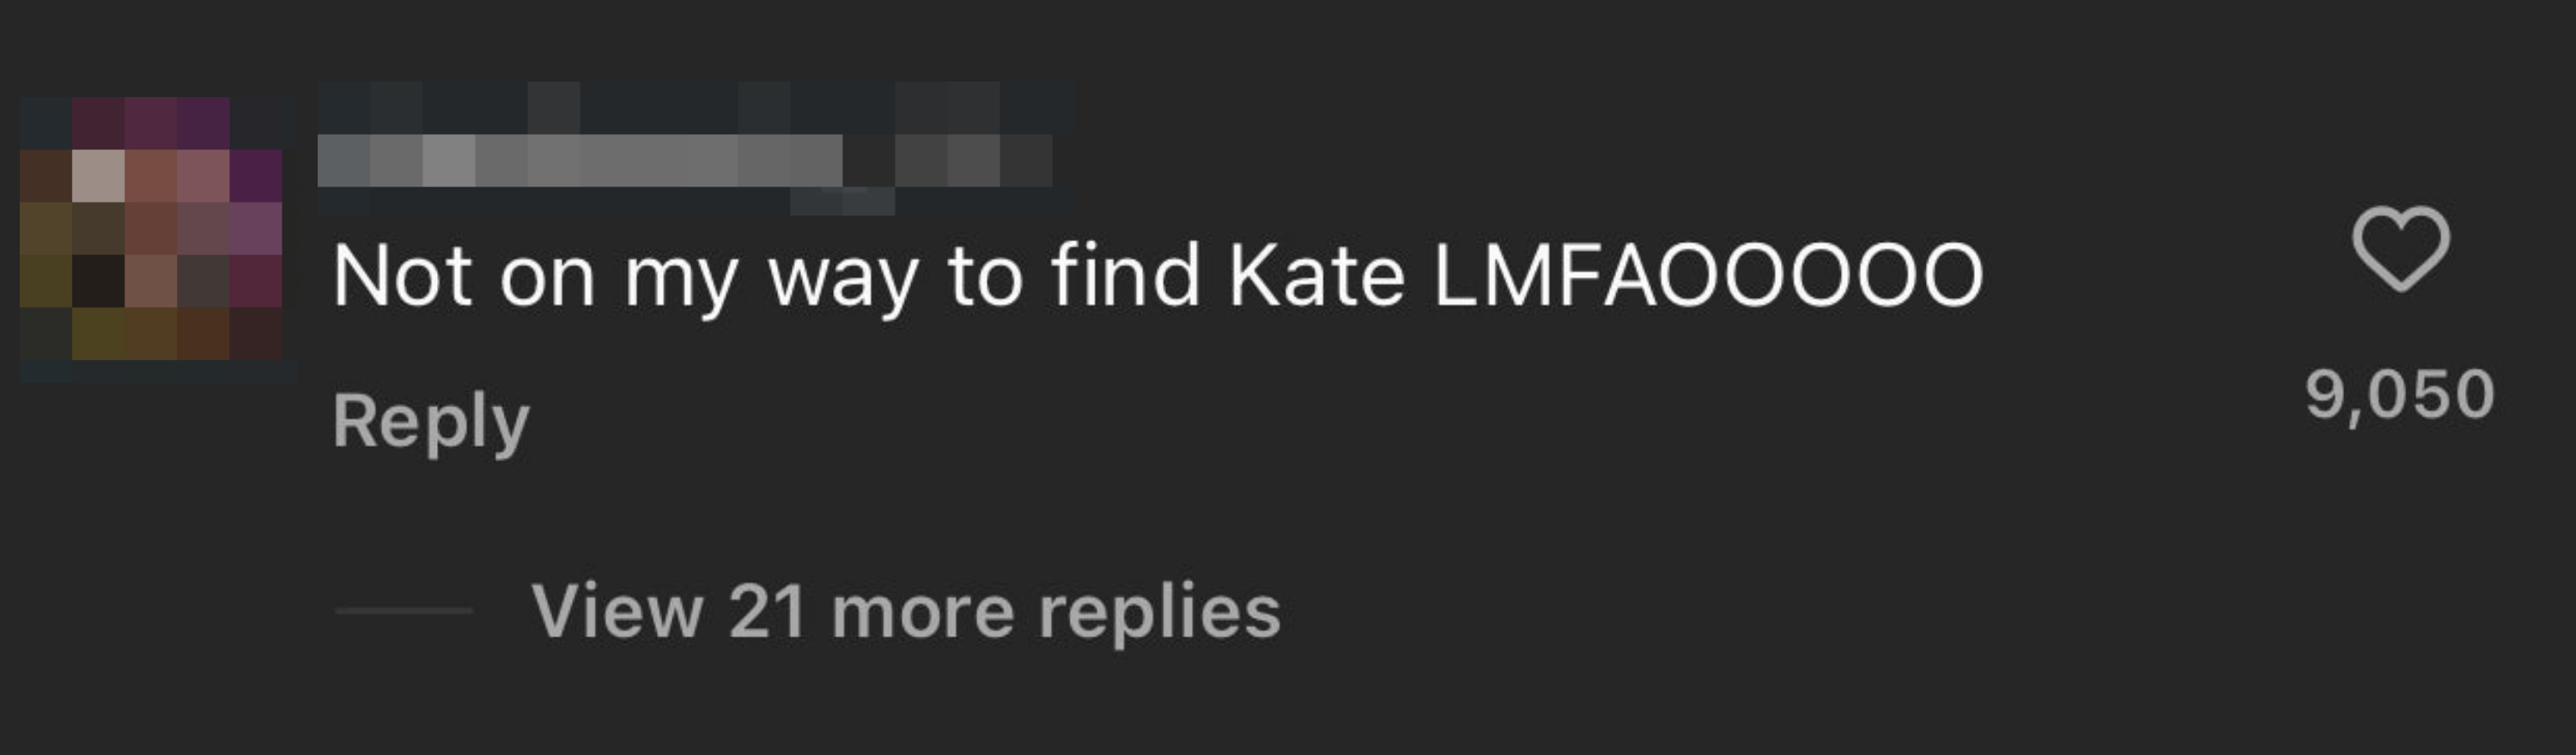 Instagram comment by user &#x27;shamilrosario_&#x27; saying &quot;Not on my way to find Kate LMFAOOOOO&quot; with 9,050 likes